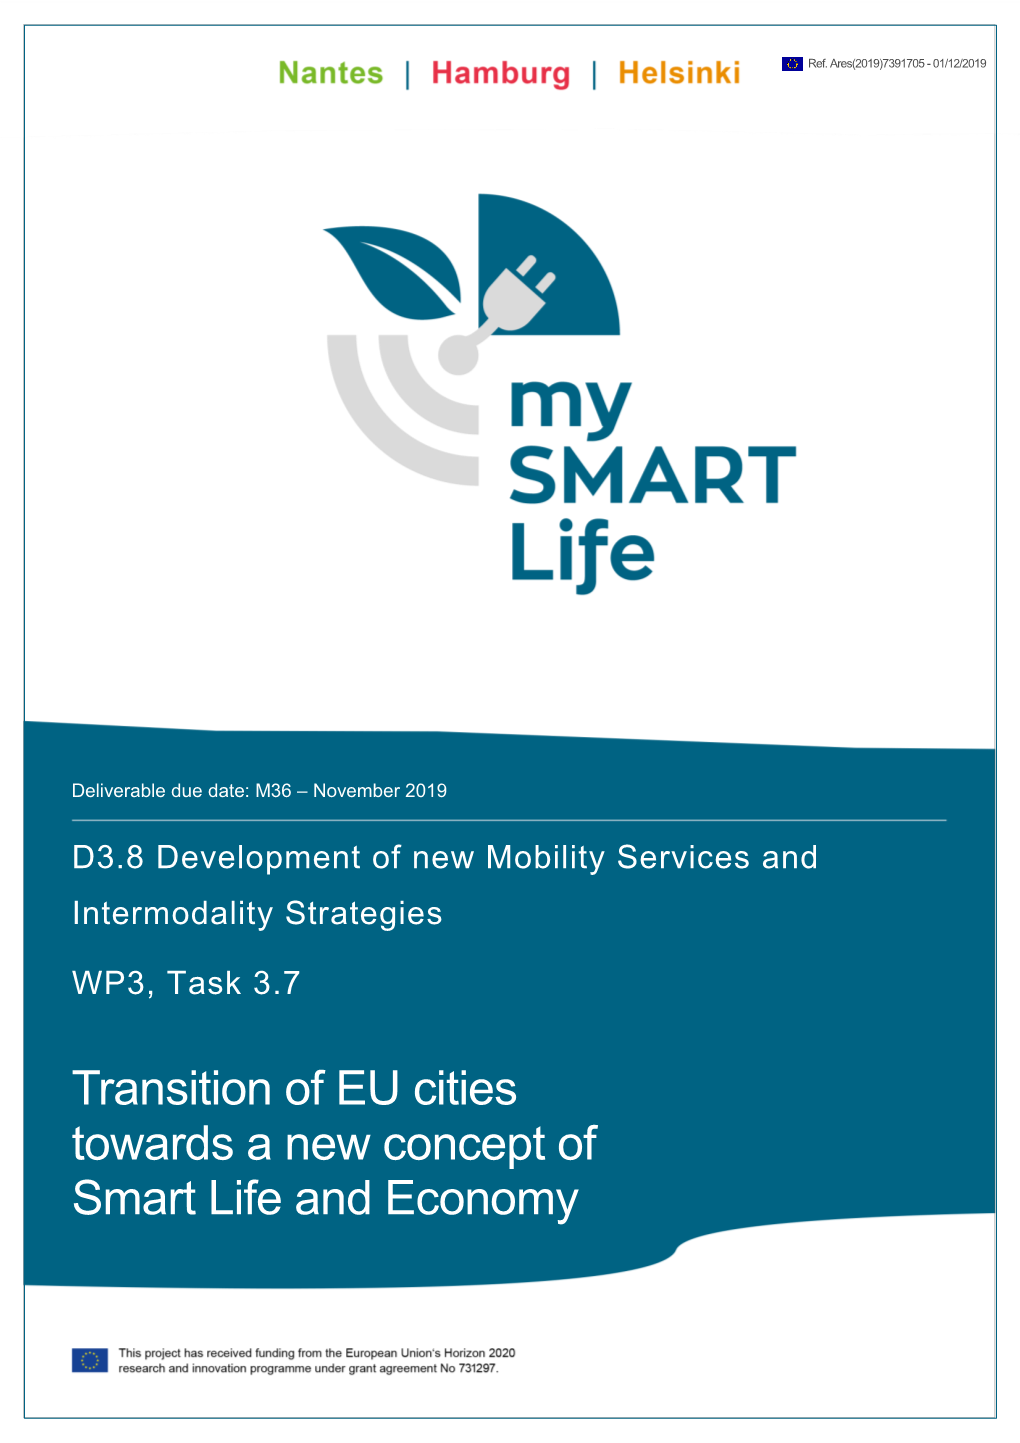 Transition of EU Cities Towards a New Concept of Smart Life and Economy D3.8 Development of New Mobility Services and Intermodality Strategies Page 2